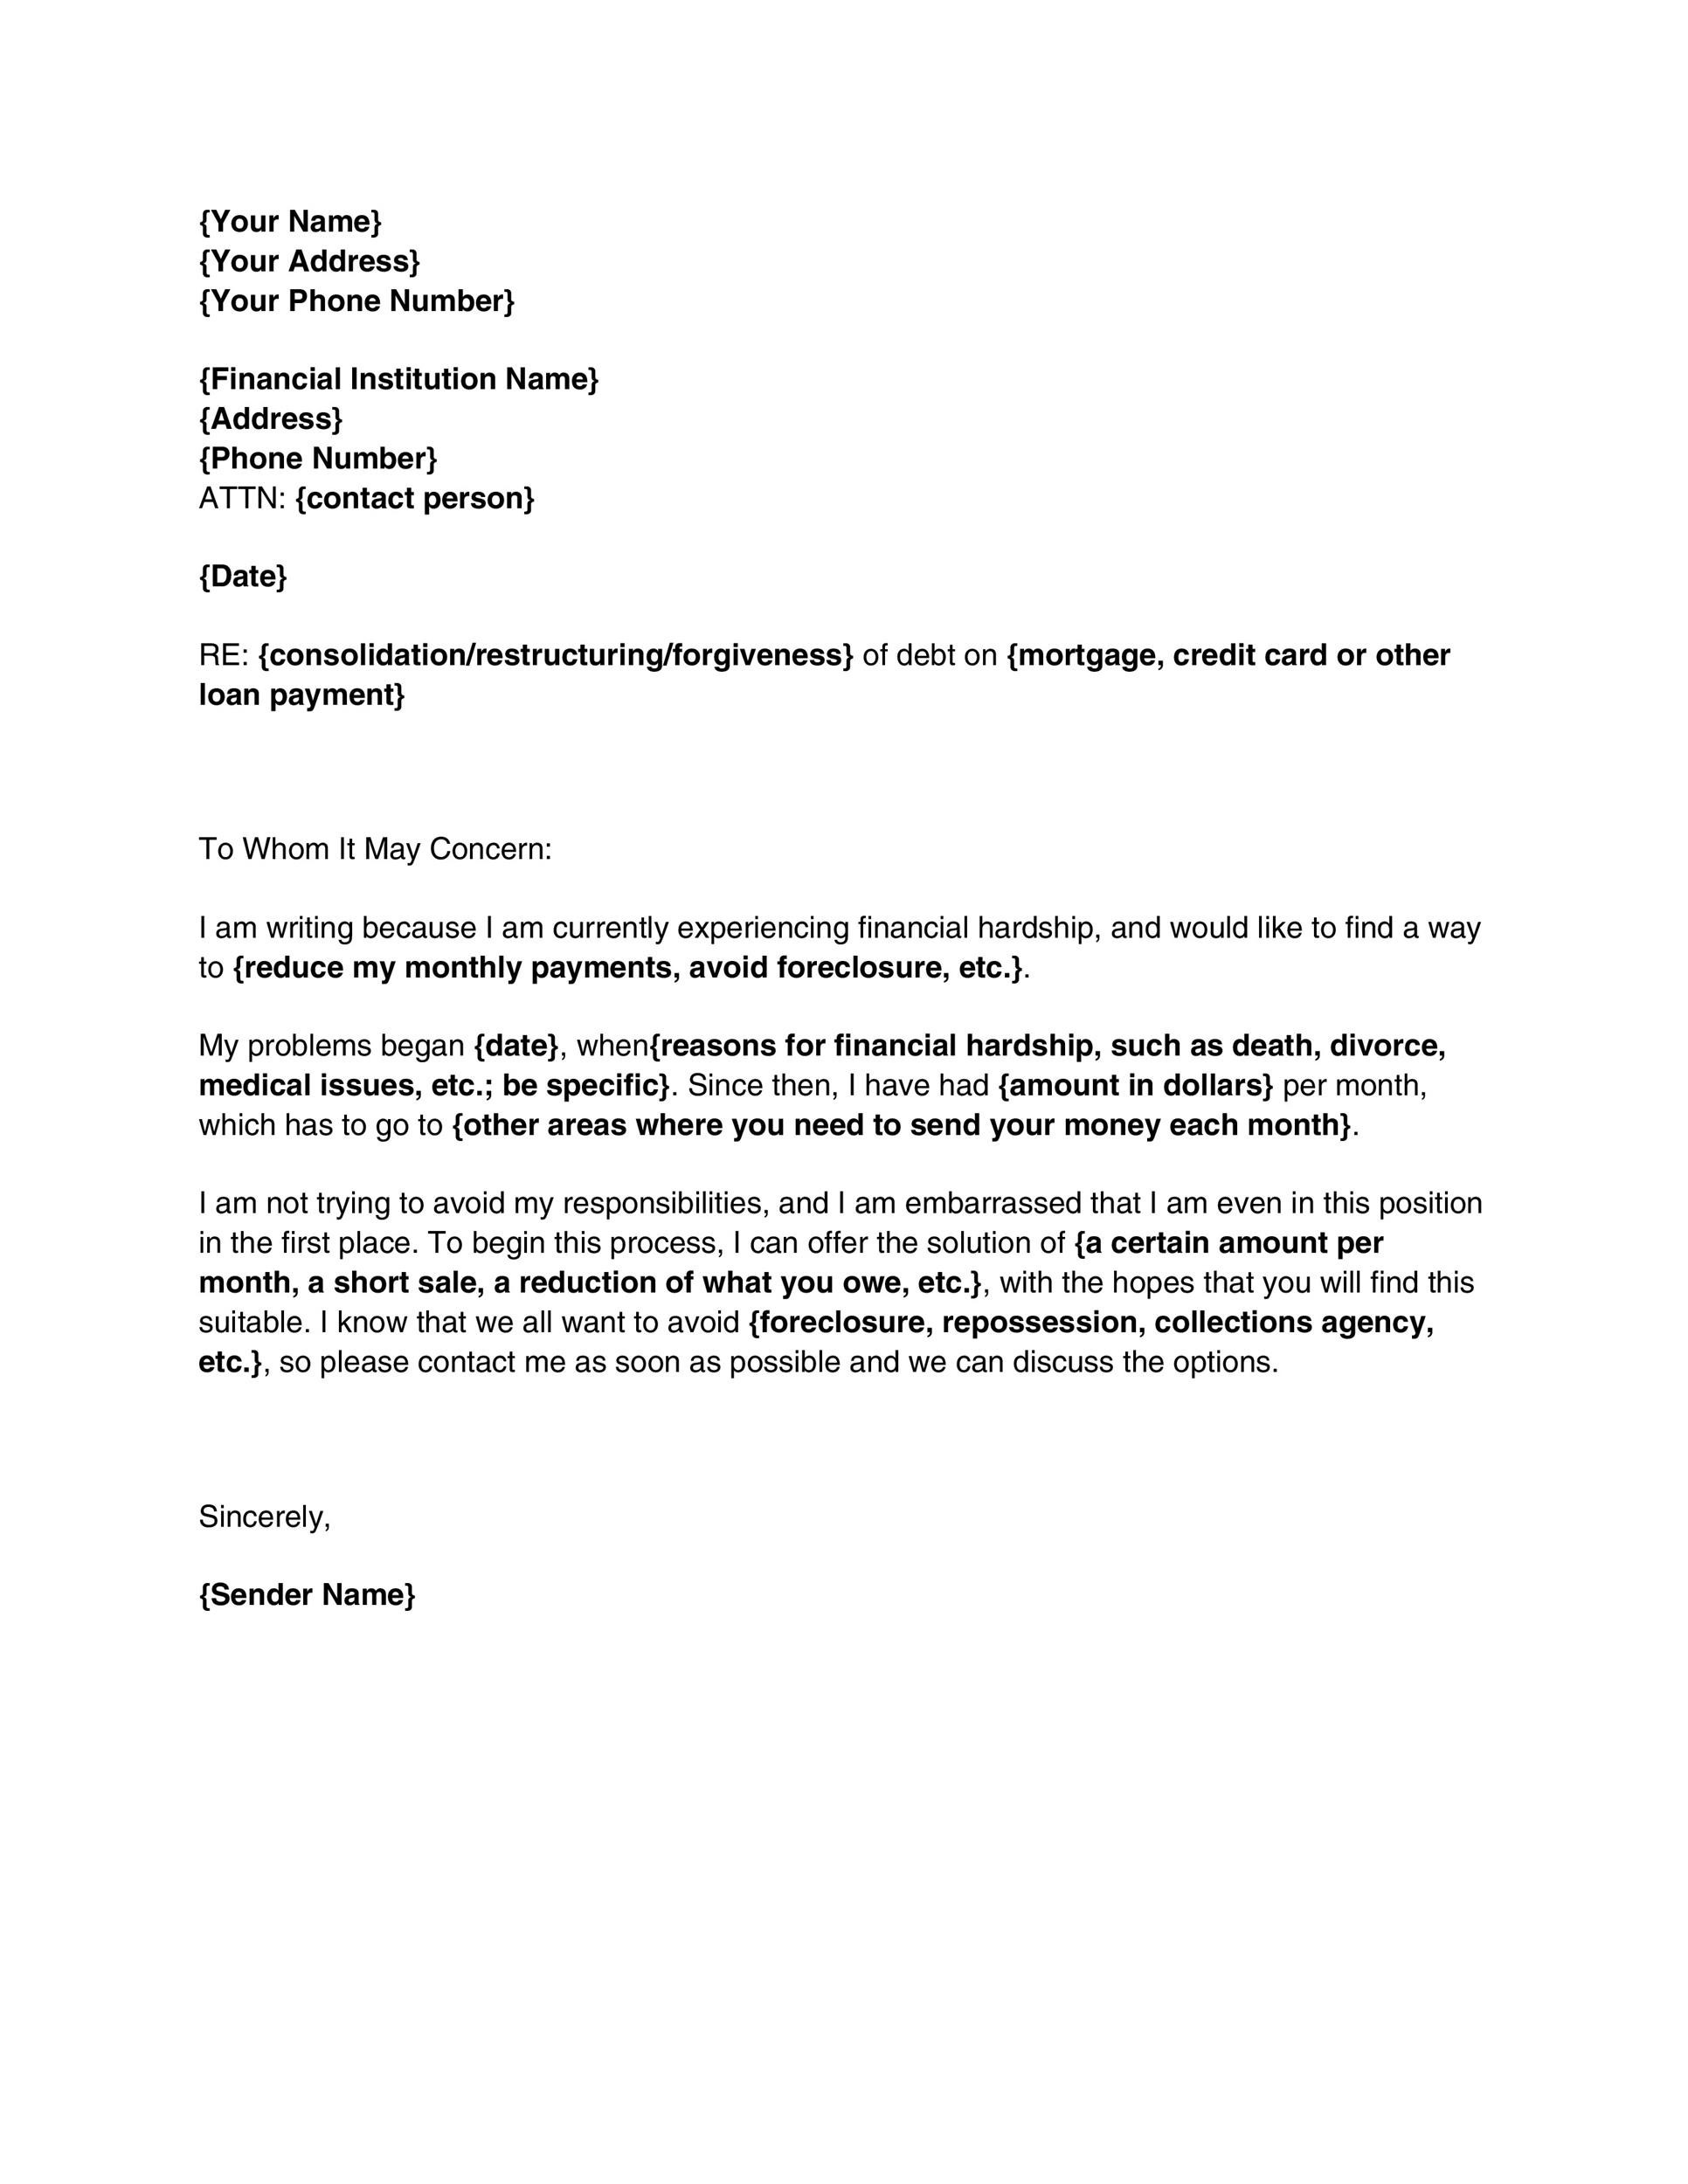 Sample Letter Of Termination Of Employment Due To Restructuring from templatelab.com